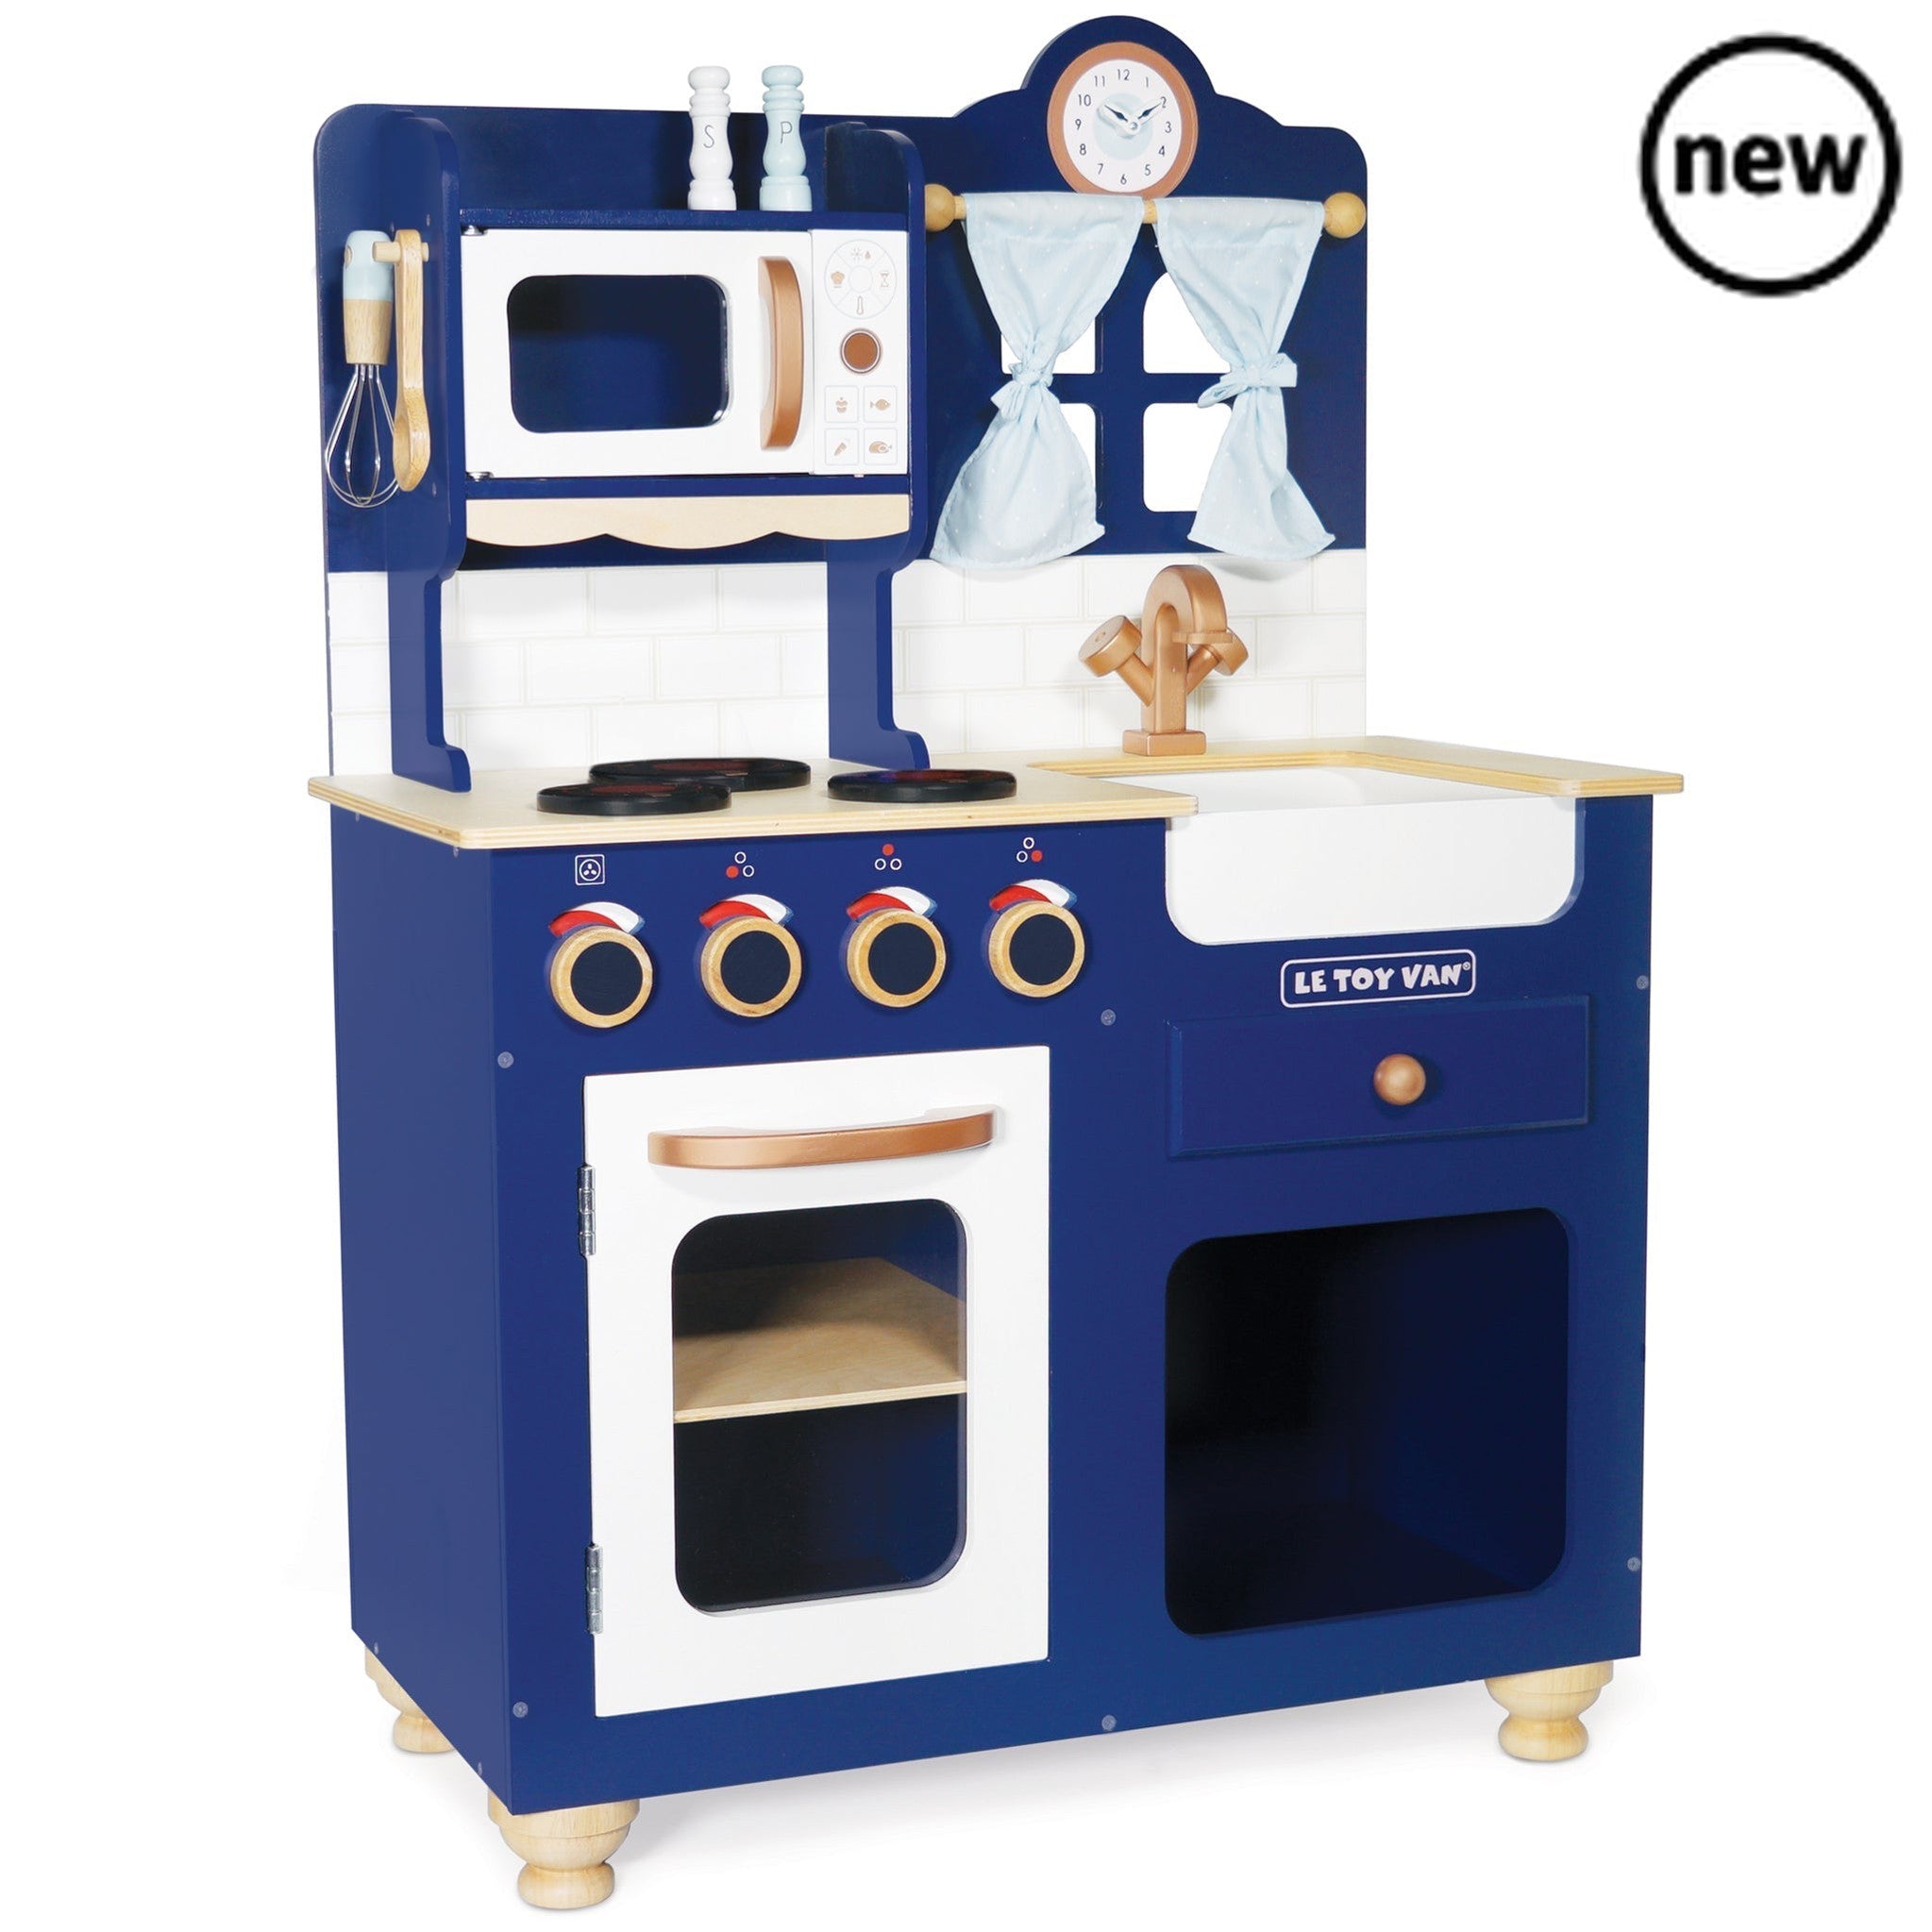 Oxford Toy Kitchen, Description Our award winning Oxford Kitchen is a real stunner. Made from durable, sustainable wood, it's eye-catching original design and beautiful craftsmanship make it a real showstopper! Painted in a striking royal blue colourway and finished with copper effect detailing, this traditional toy makes a great addition to the playroom or kids room and is ready for role play fun. Packed with delightful features, designed to promote extensive pretend play, including oven with opening door,